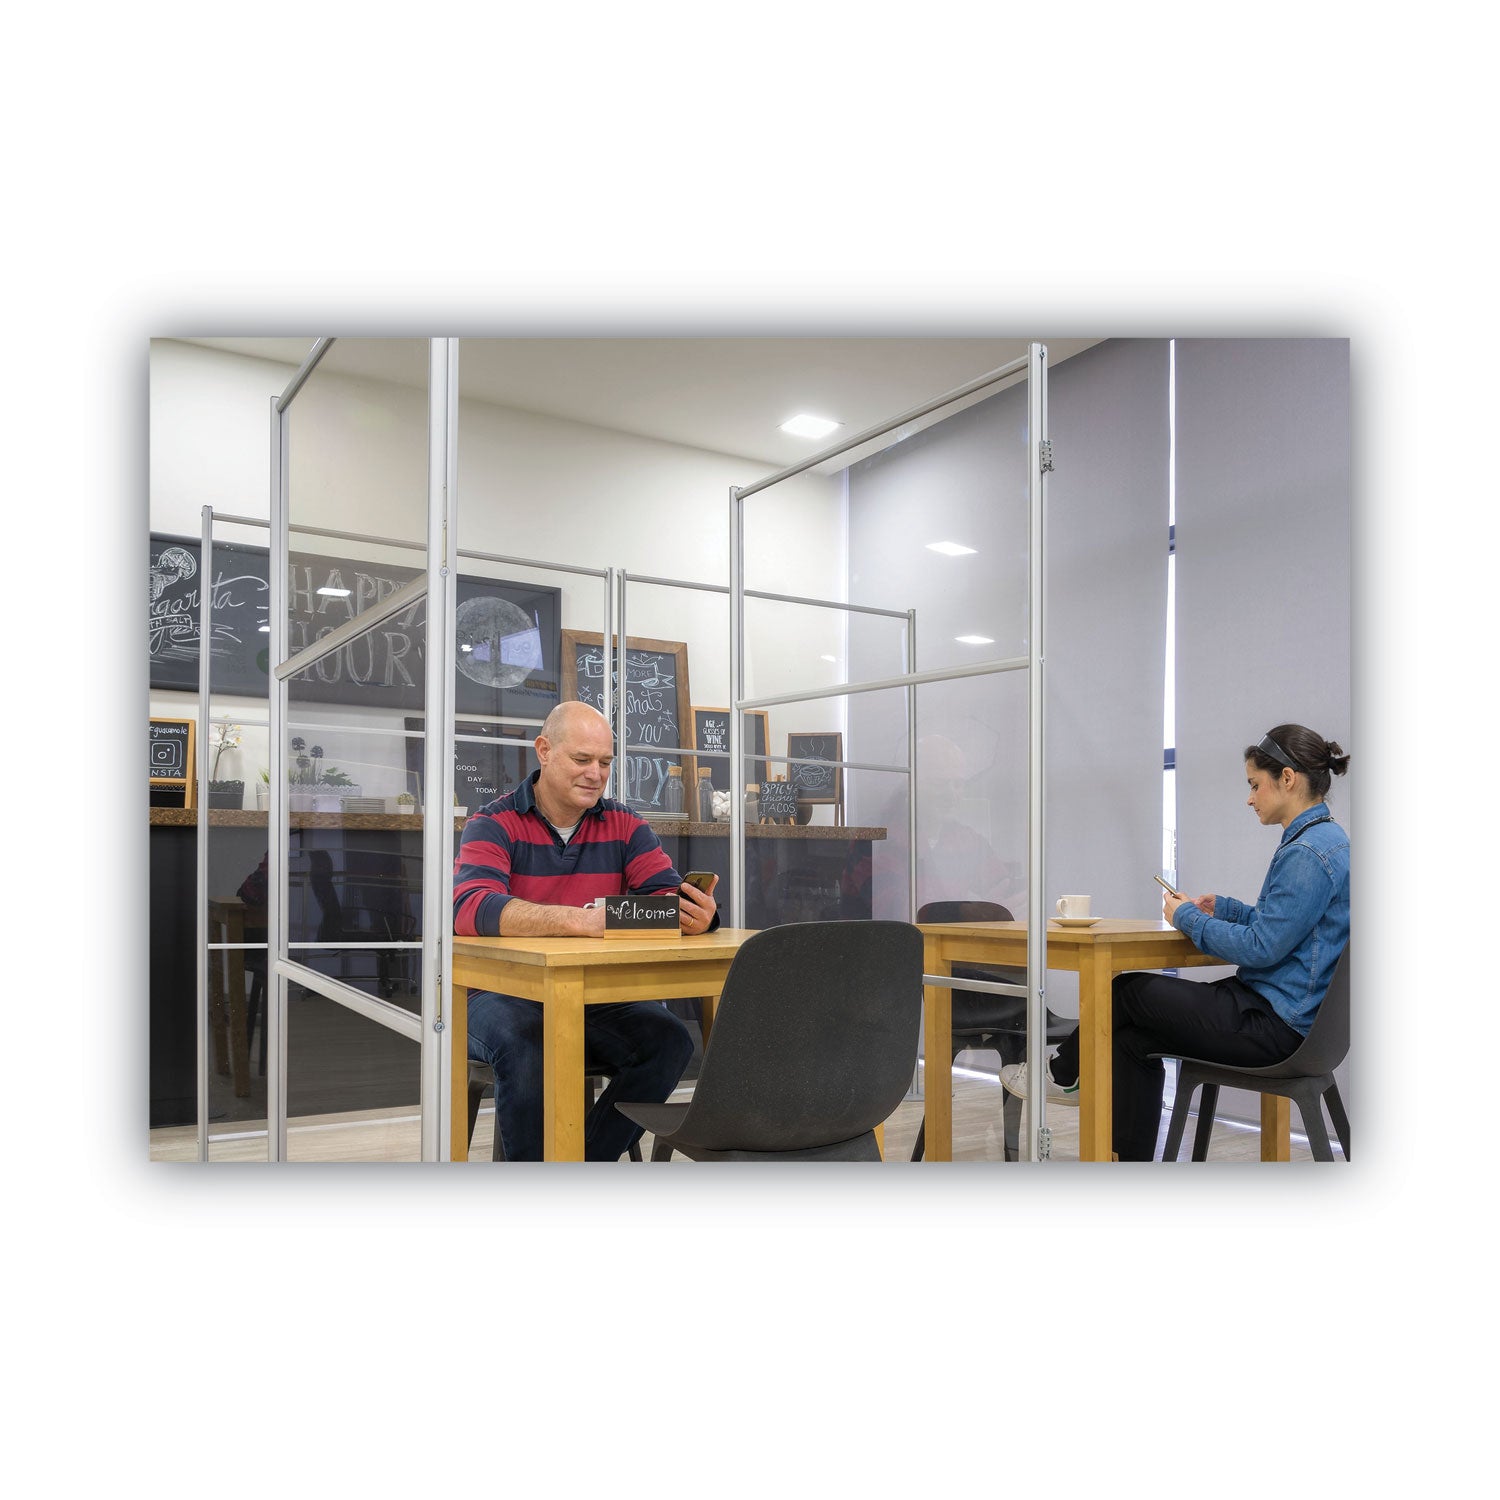 protector-series-mobile-glass-panel-divider-49-x-22-x-69-clear-aluminum_bvcdsp123046 - 8